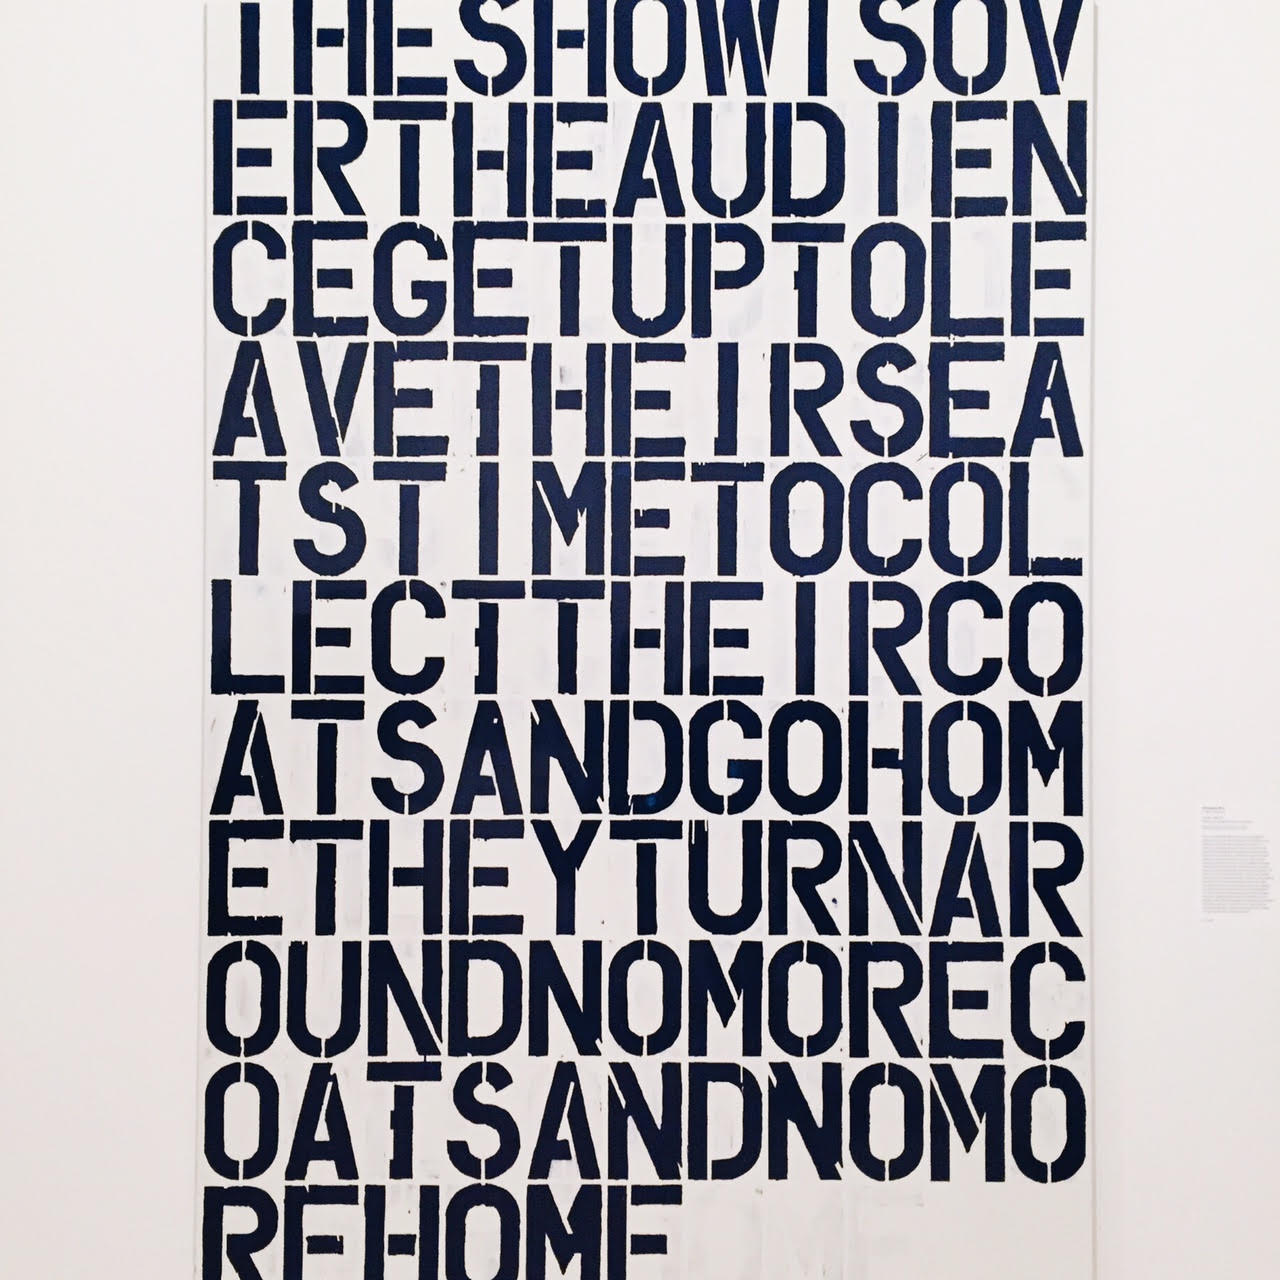 Christopher Wool, “Untitled” (1990–91), enamel and graphite pencil on aluminum by rochelle greayer www.pithandvigor.com